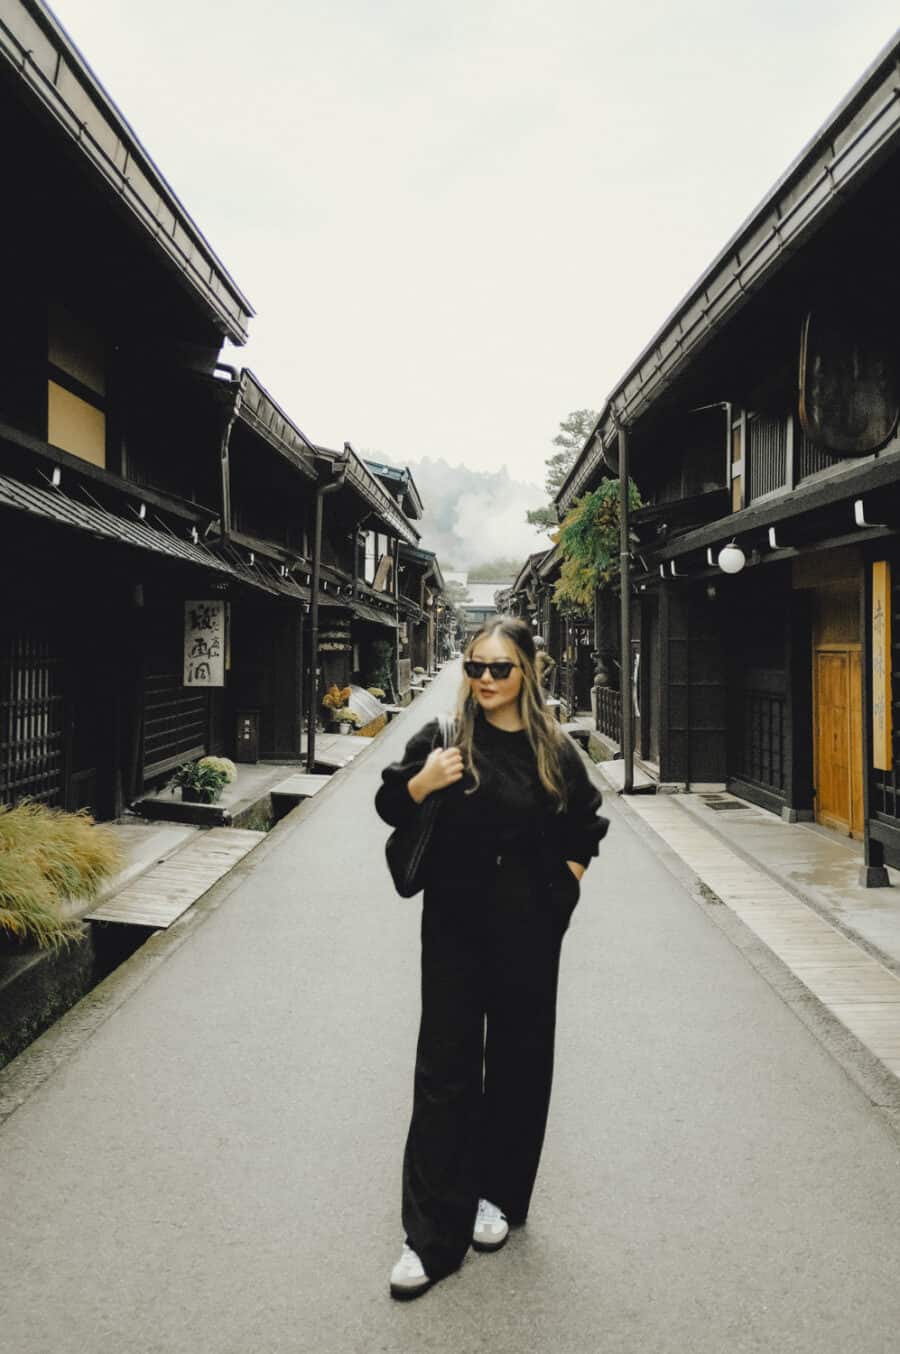 Coco Tran — Aesthetic Travel Blog By Film Photographer Coco Tran https://cocotran.com/where-to-stay-in-takayama/